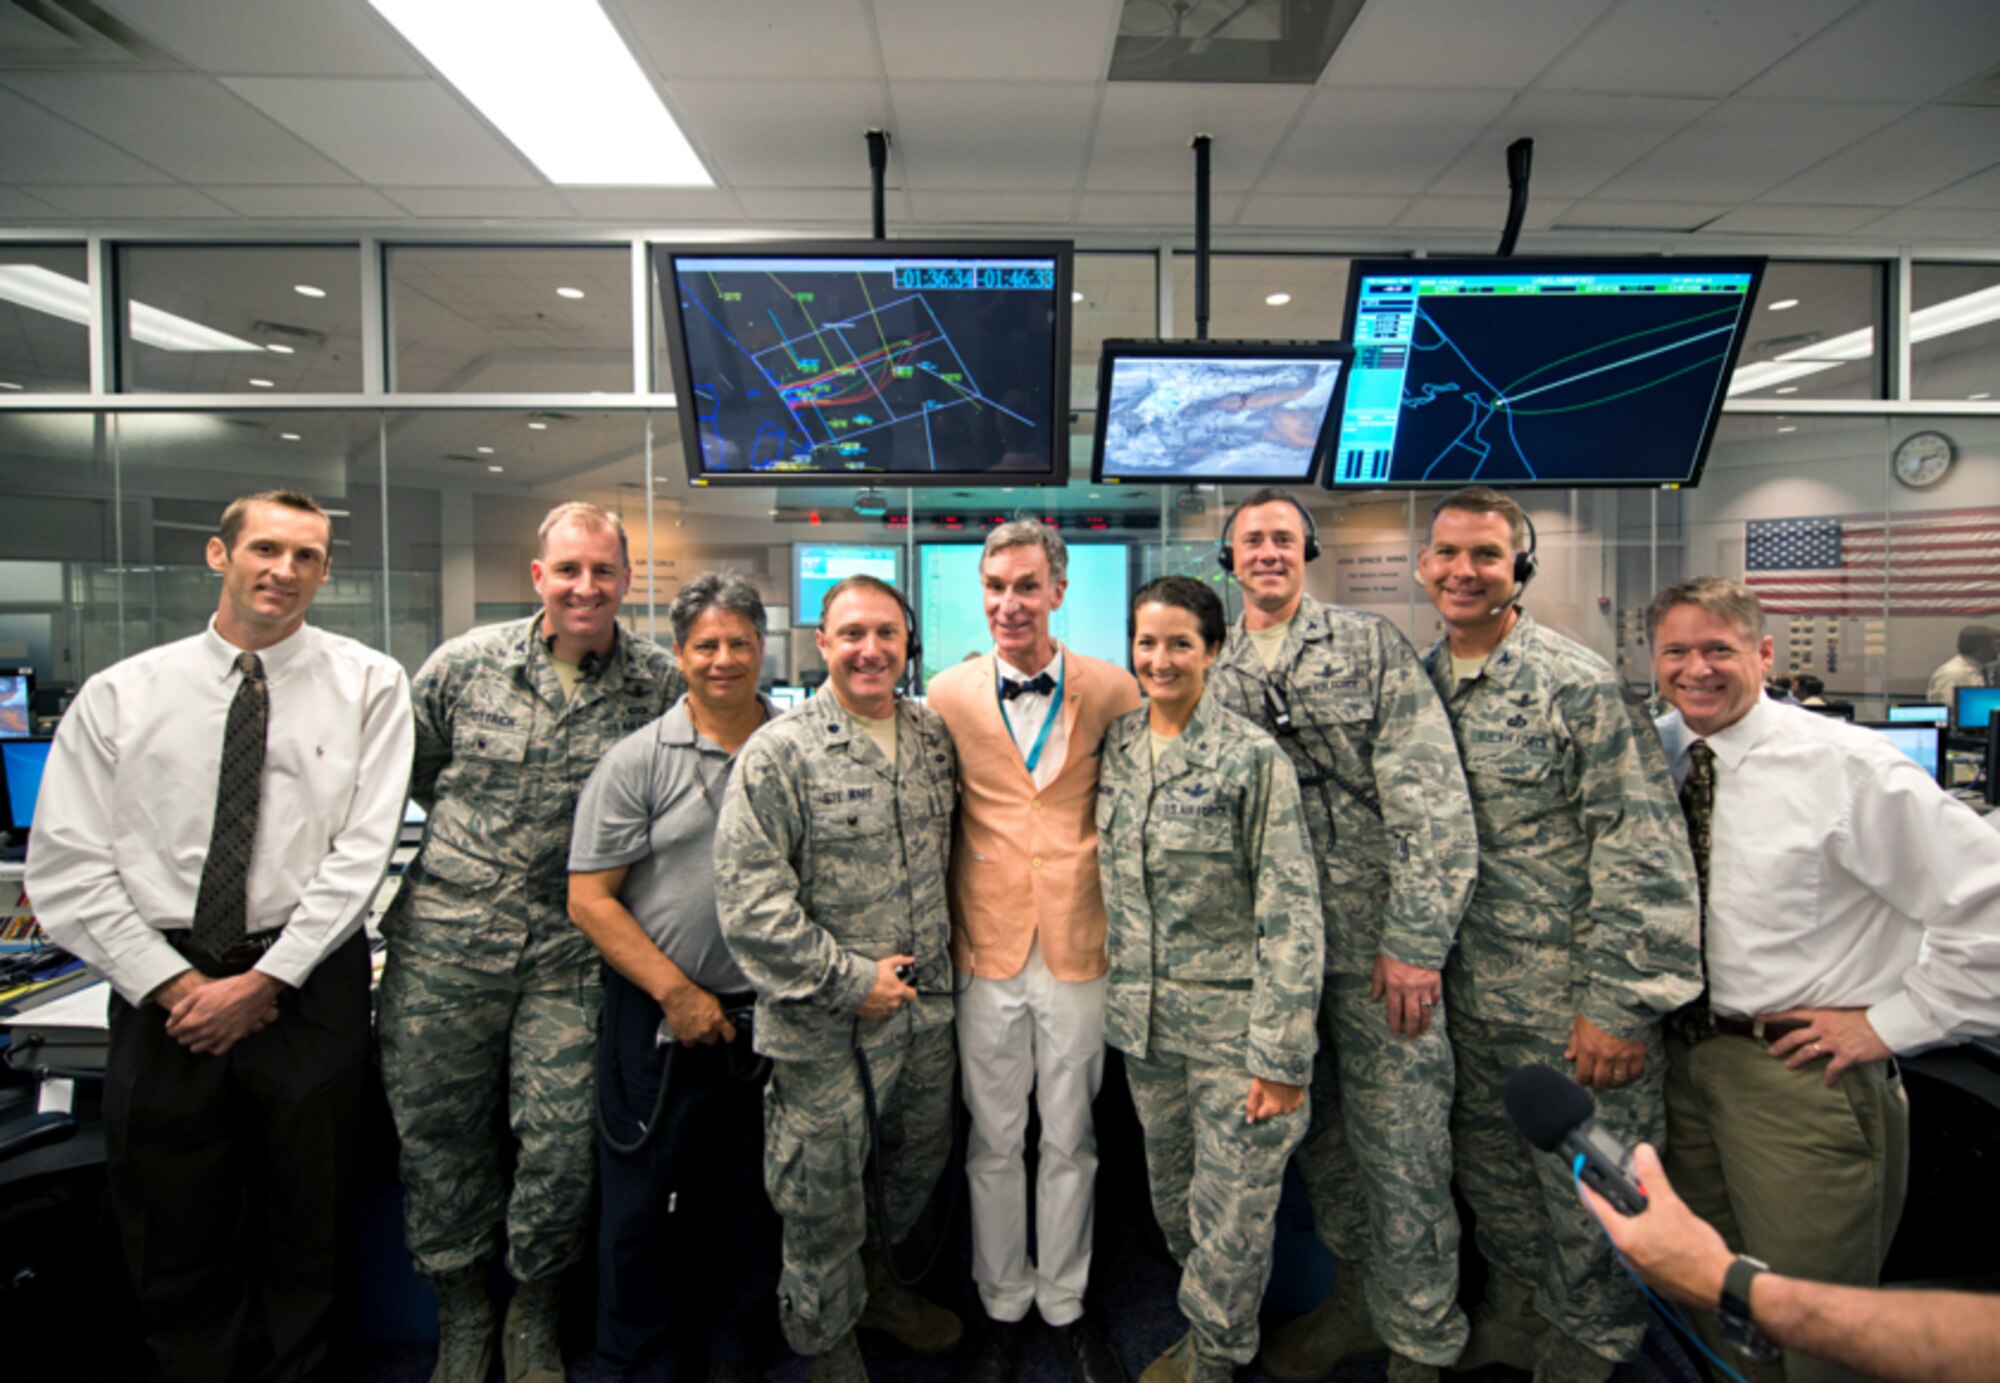 Brig. Gen. Nina Armagno, 45th Space Wing commander, and launch team, pose with Bill Nye, Planetary Society CEO, in the Morrell Operations Center, May 21, 2015, at Cape Canaveral Air Force Station, Fla. Team Patrick-Cape hosted Bill Nye the Science Guy and the Planetary Society team for a tour of CCAFS and met with several Airmen. (Courtesy photo/Navid Baraty/ Planetary Society) (For limited release)